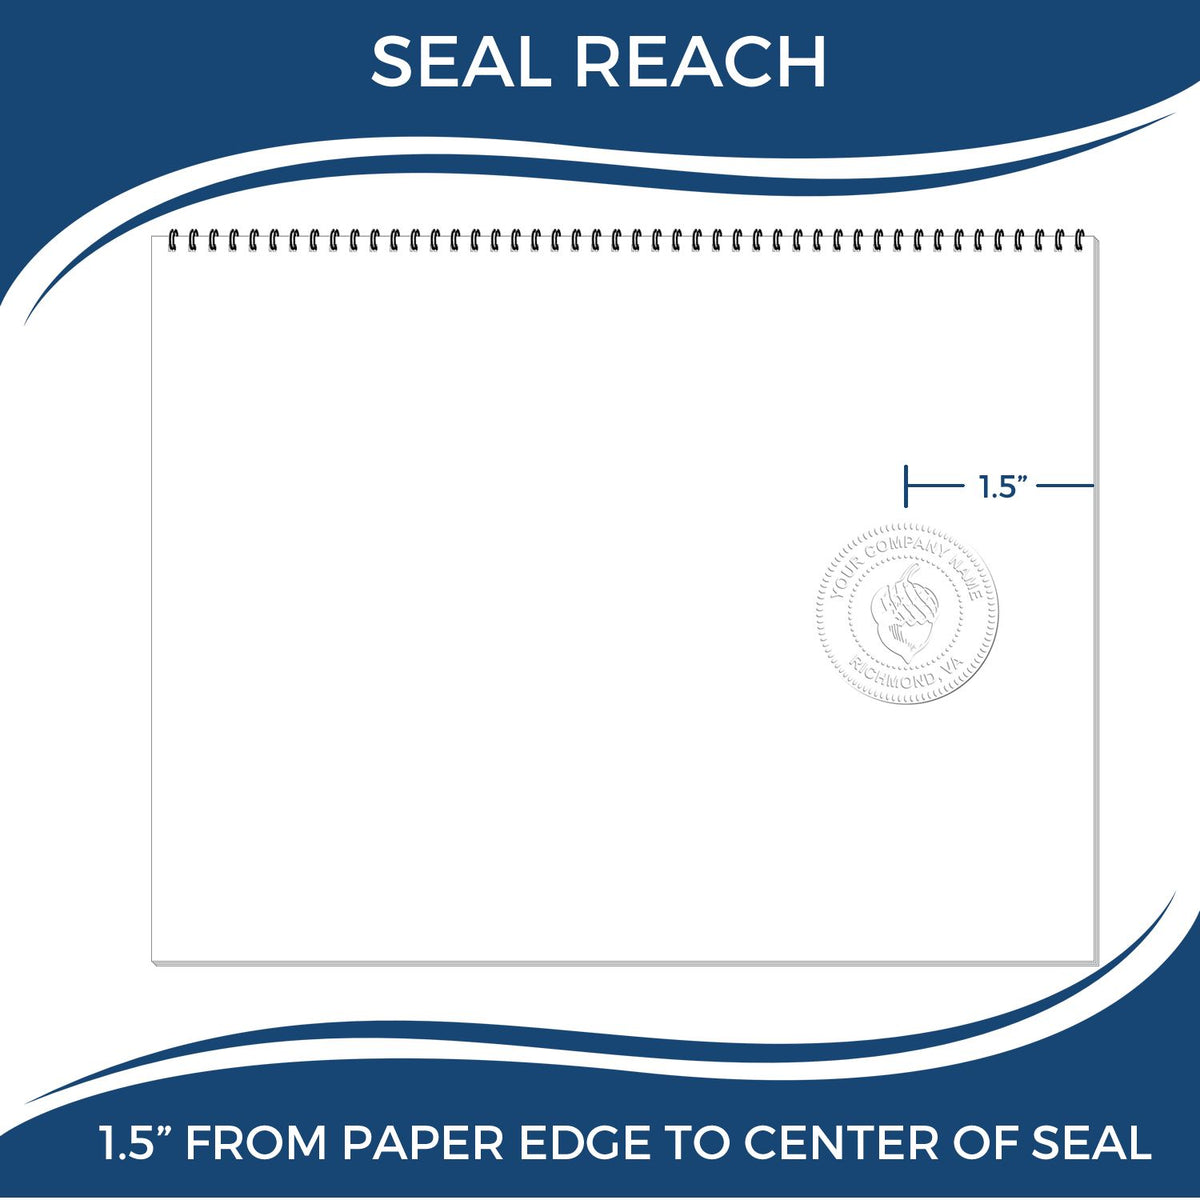 An infographic showing the seal reach which is represented by a ruler and a miniature seal image of the Handheld Connecticut Architect Seal Embosser